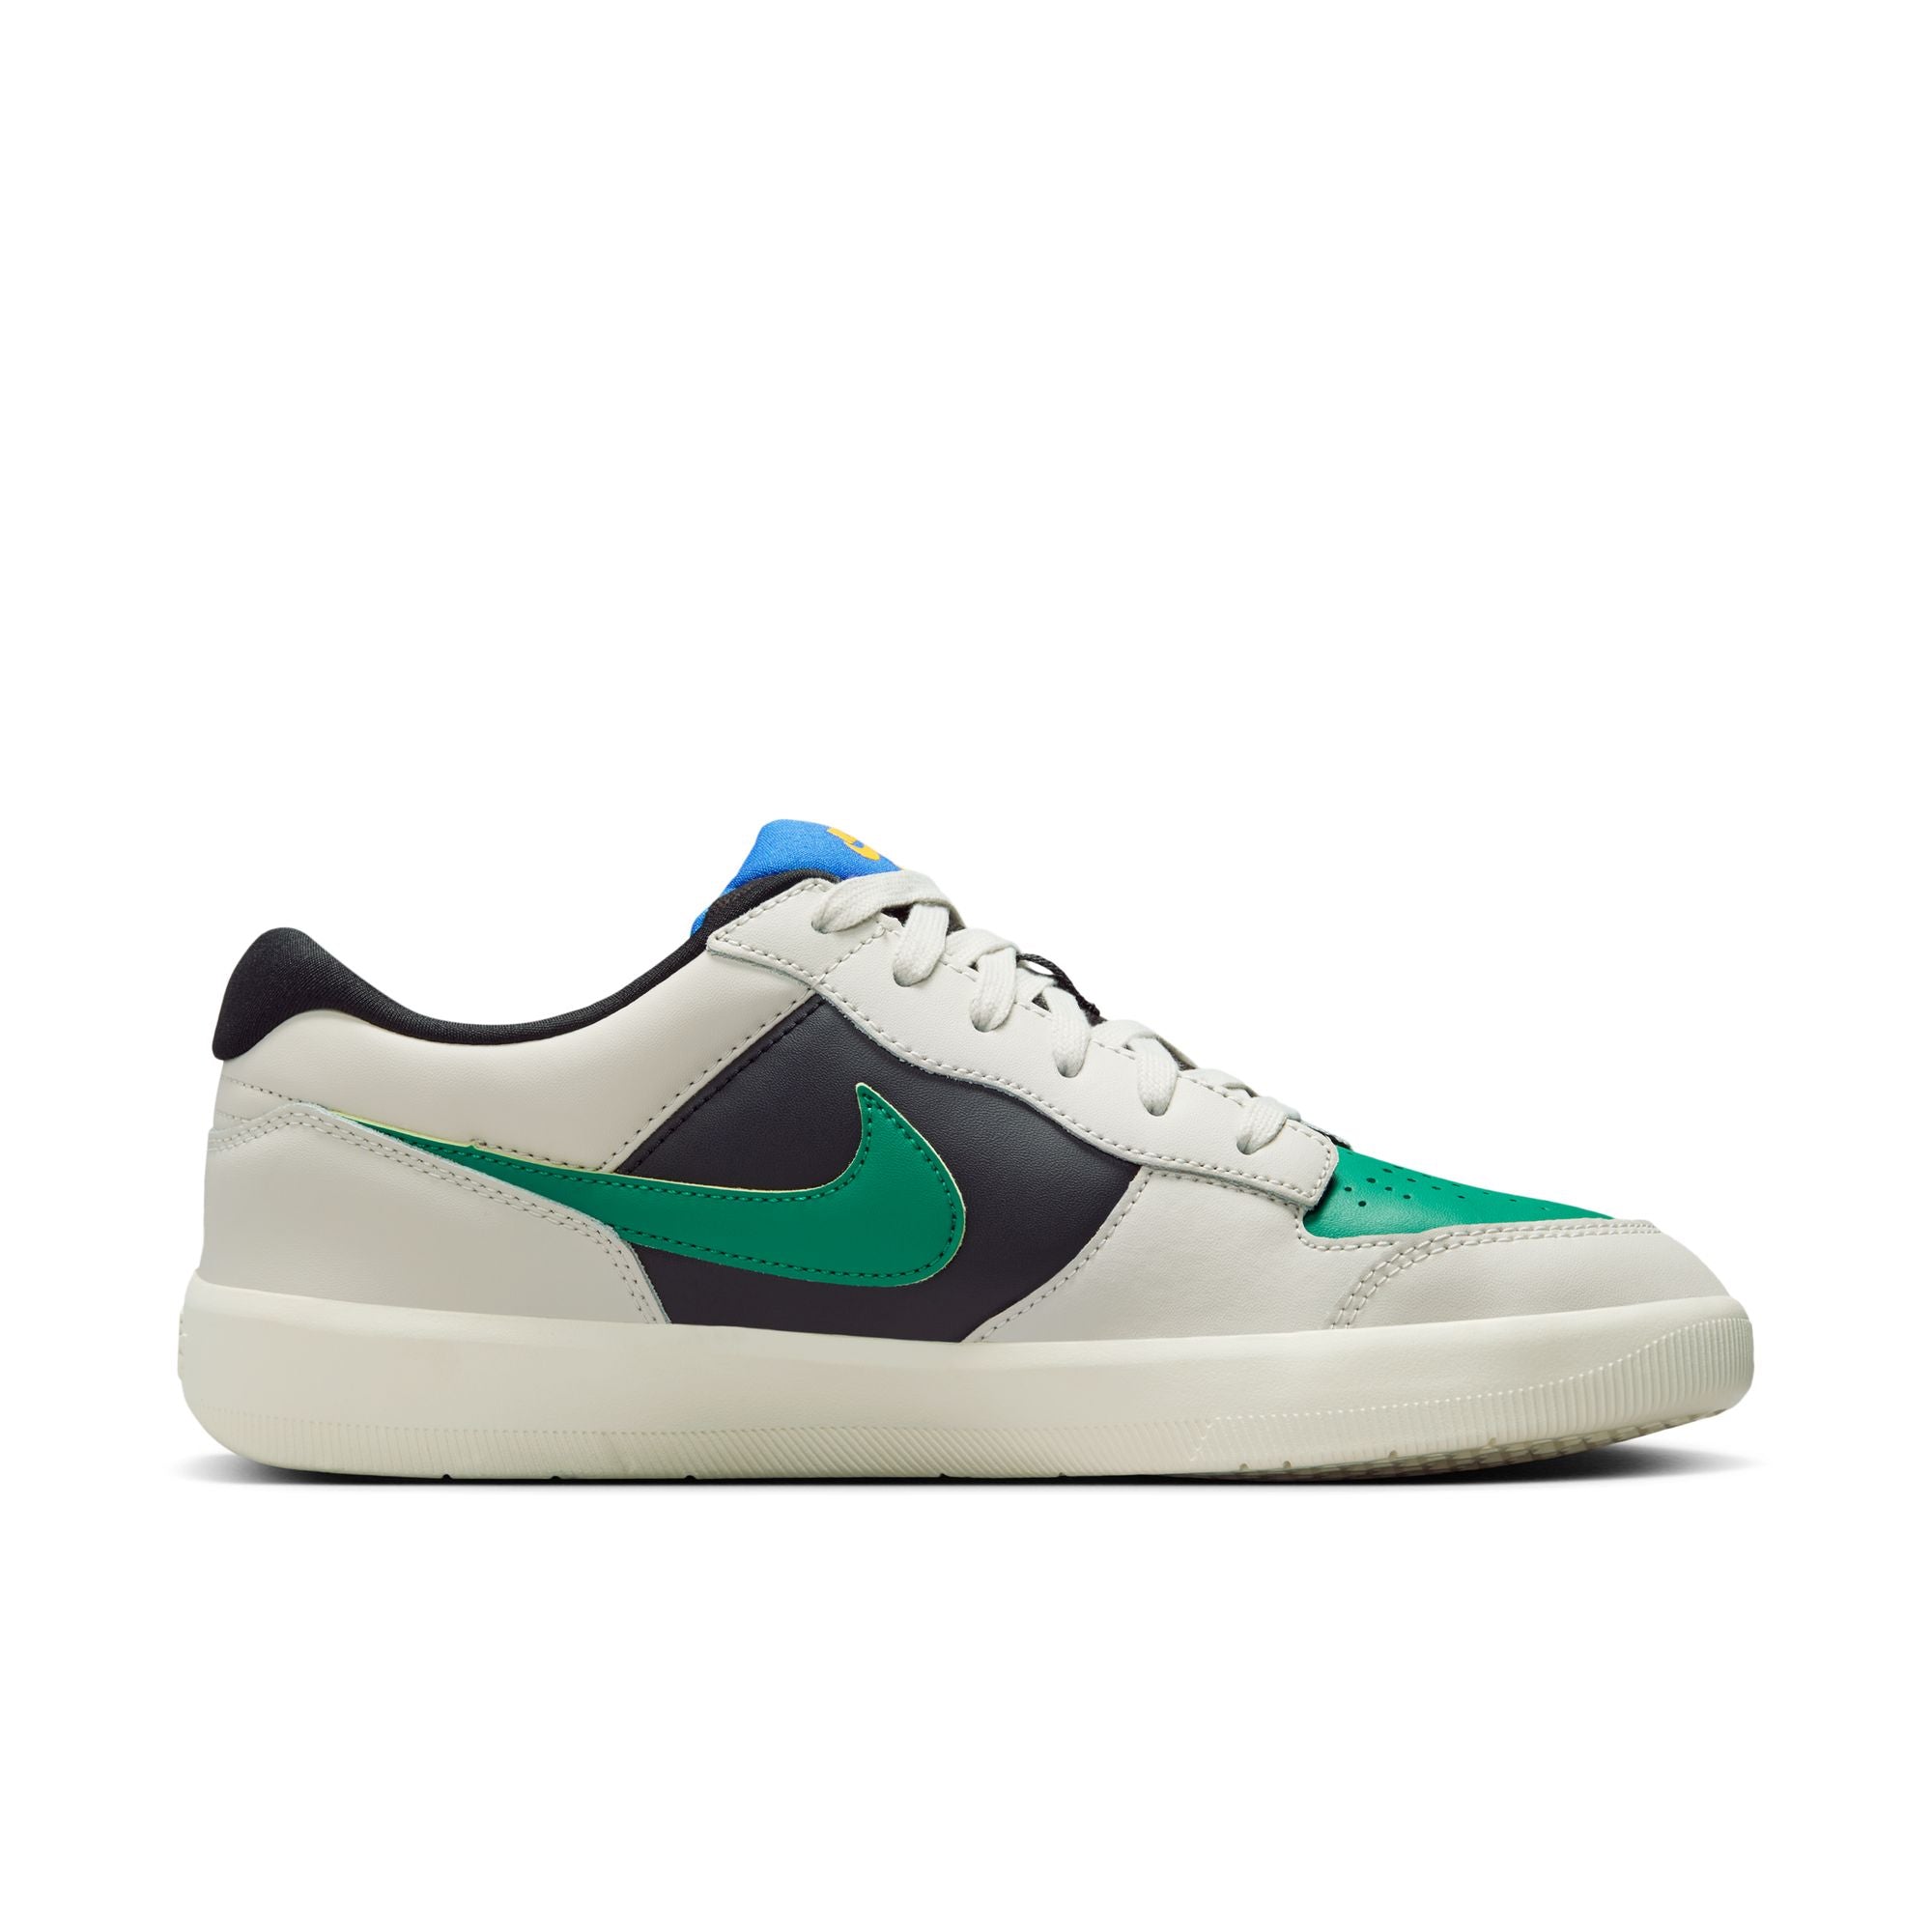 Low top Nike SB Force 58 Premium skate shoes, in light grey, black and green colourway, with blue and yellow accents on tongue and green Nike swoosh on sides.